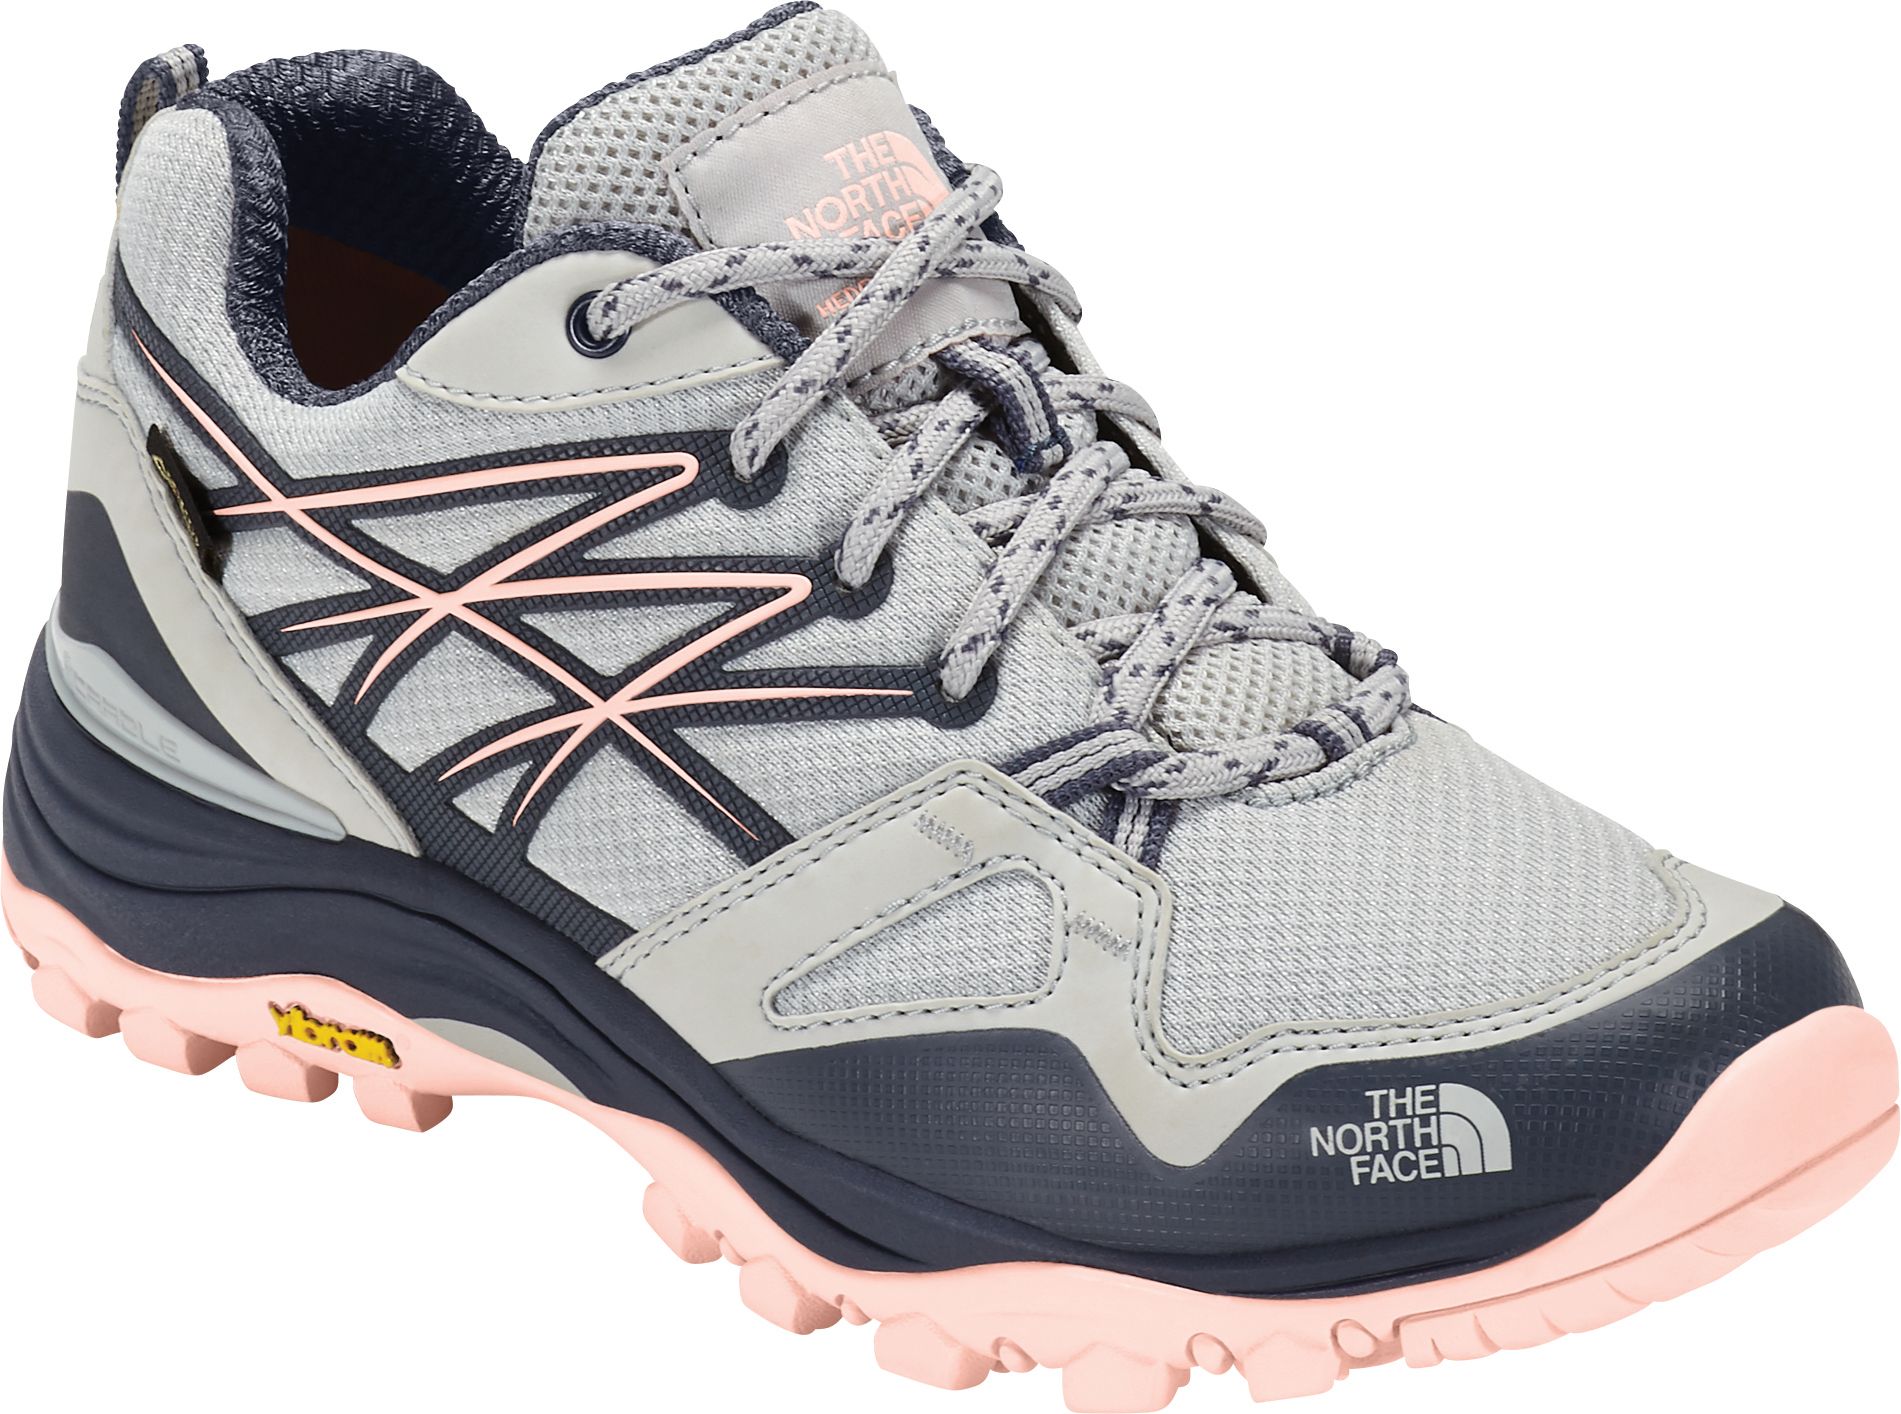 north face women's walking shoes